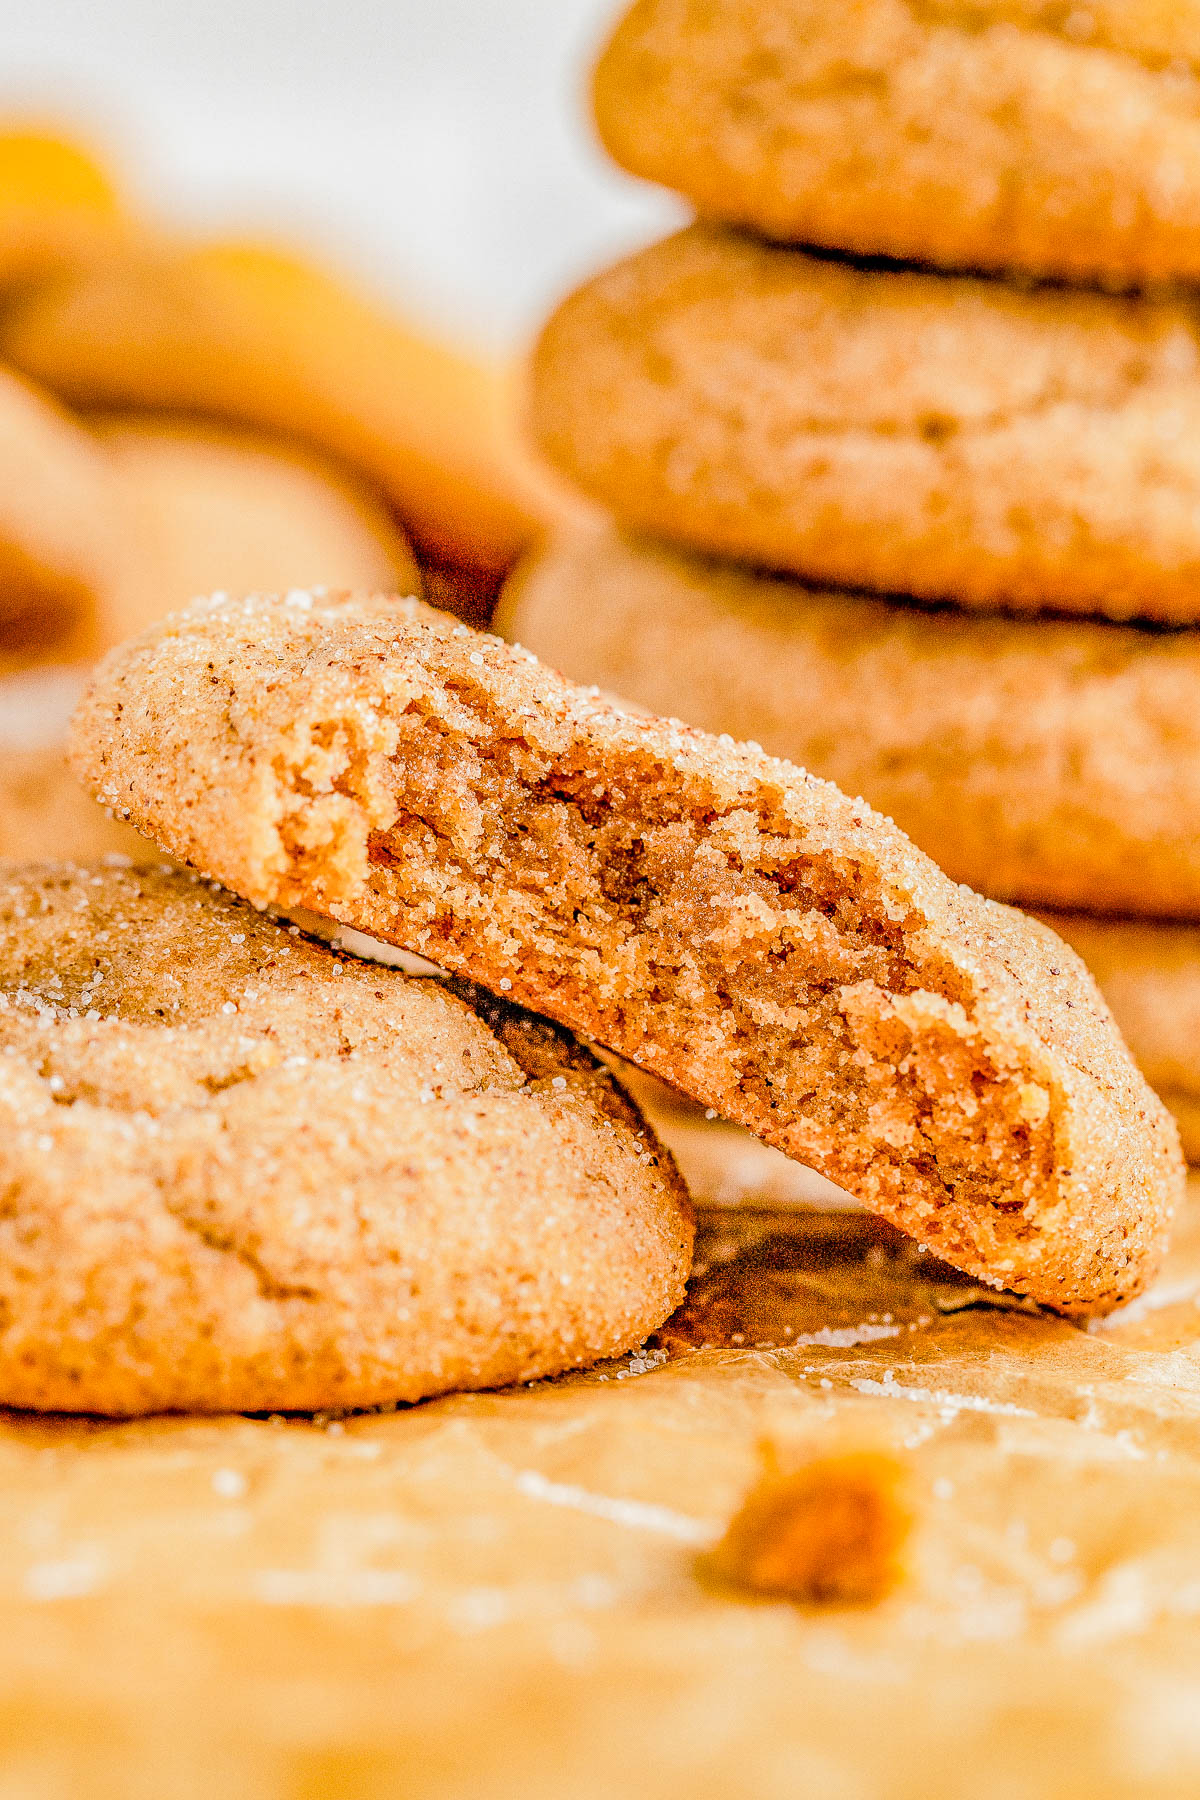 Soft and Chewy Pumpkin Snickerdoodles — Soft and pillowy in the middle, chewy around the edges, and ever so slightly crisp on the bottom! Classic snickerdoodles get a makeover with the addition of pumpkin puree and pumpkin pie spices! So EASY and the dough can be made in advance, and perfect for all those COZY fall vibes!